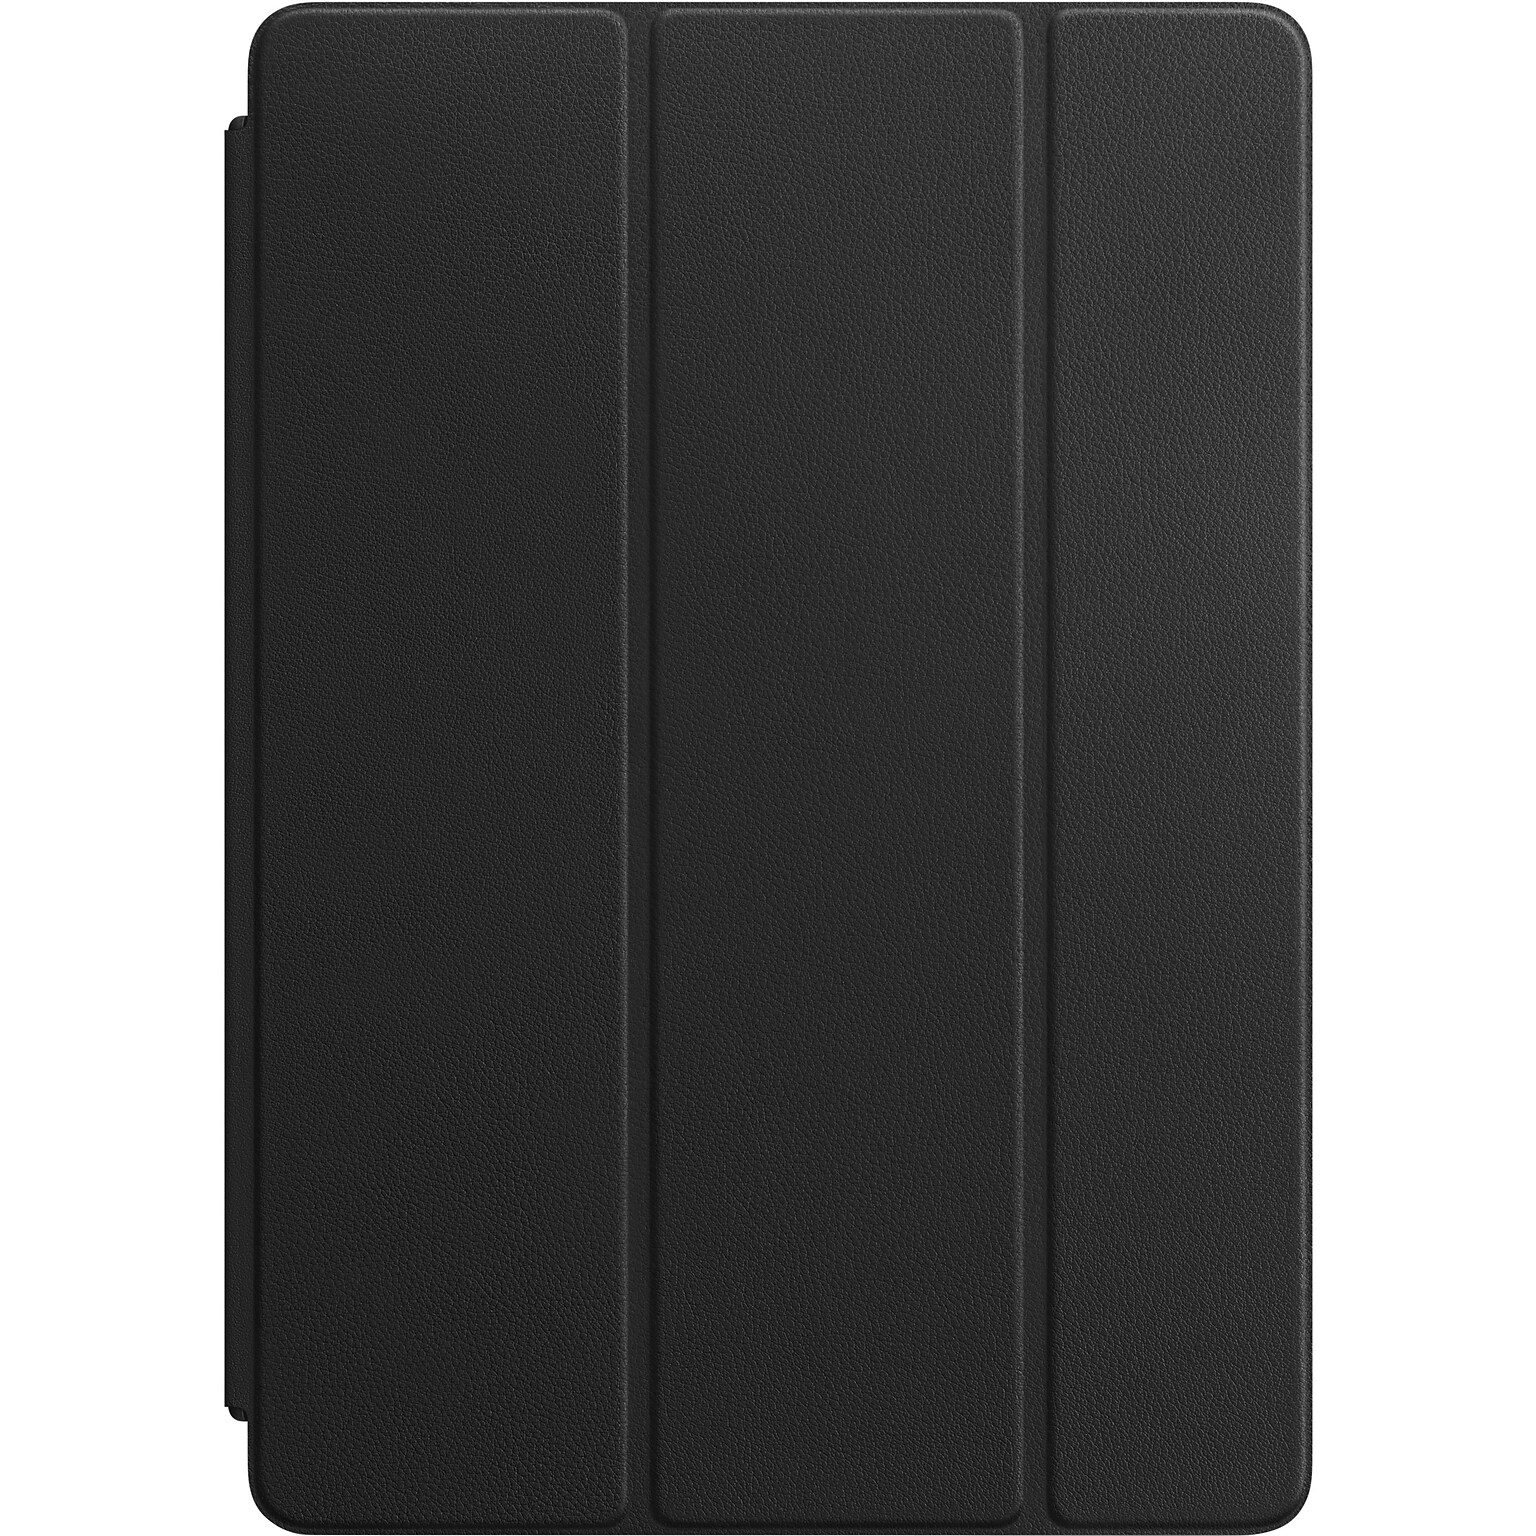 Apple Smart Cover Cover Case (Cover) for 10.5 iPad Pro, Black